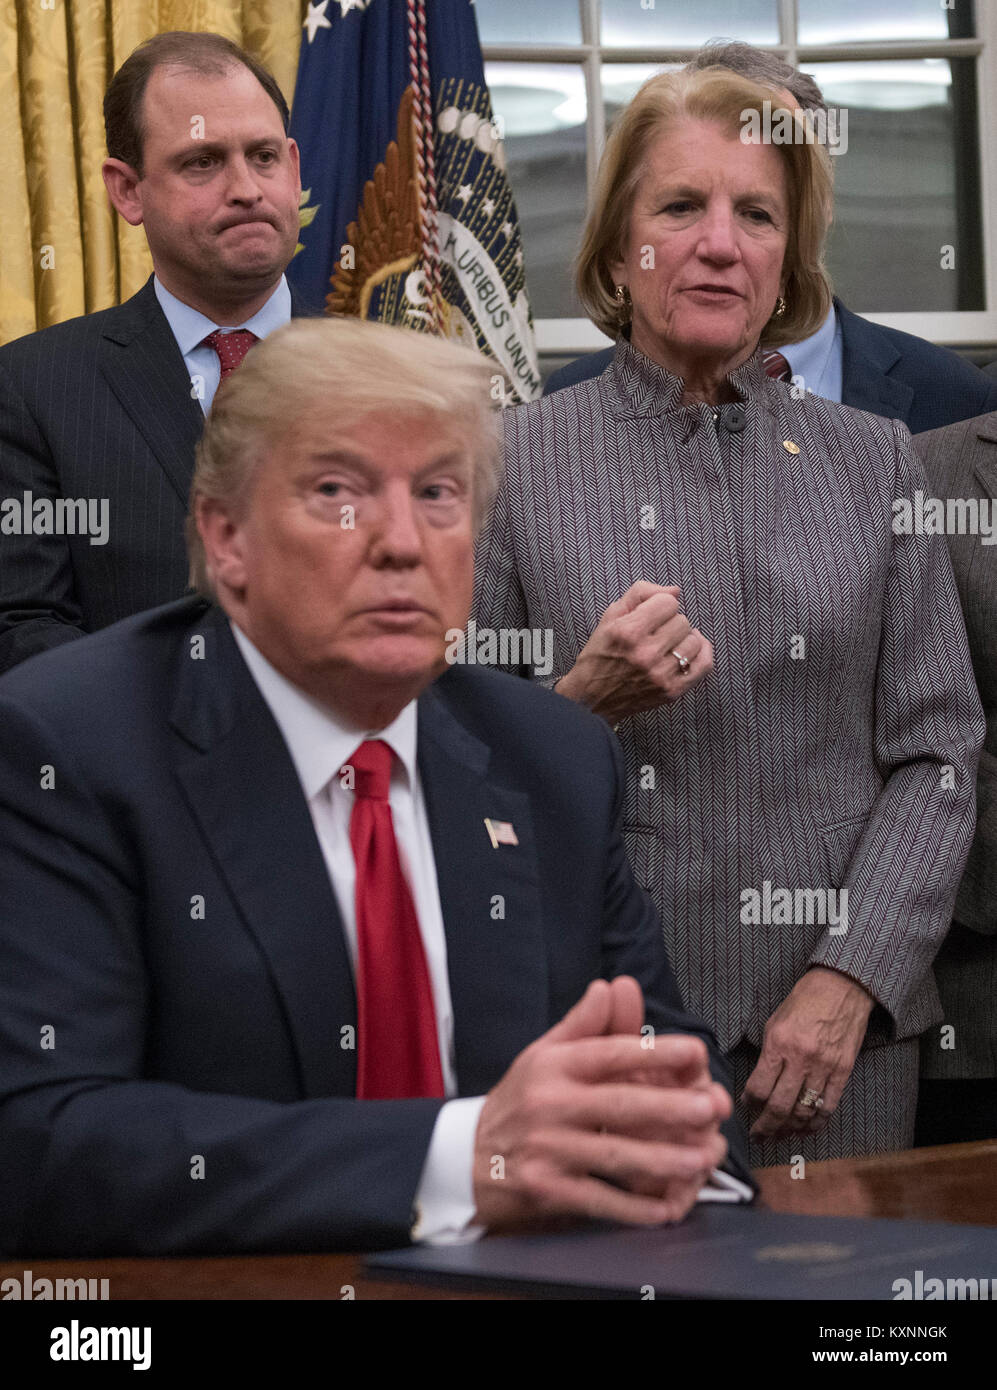 United States President Donald J. Trump listens as US Senator Shelley Moore Capito (Republican of West Virginia) makes remarks prior to his signing the bipartisan Interdict Act, a bill to stop the flow of opioids into the United States in the Oval Office of the White House in Washington, DC on Wednesday, January 10, 2018. The Interdict Act will provide Customs and Border Protection agents with the latest screening technology devices used to secure our border from illicit materials, specifically fentanyl, a powerful opioid that is destroying lives across the country. Credit: Ron Sachs / Pool vi Stock Photo